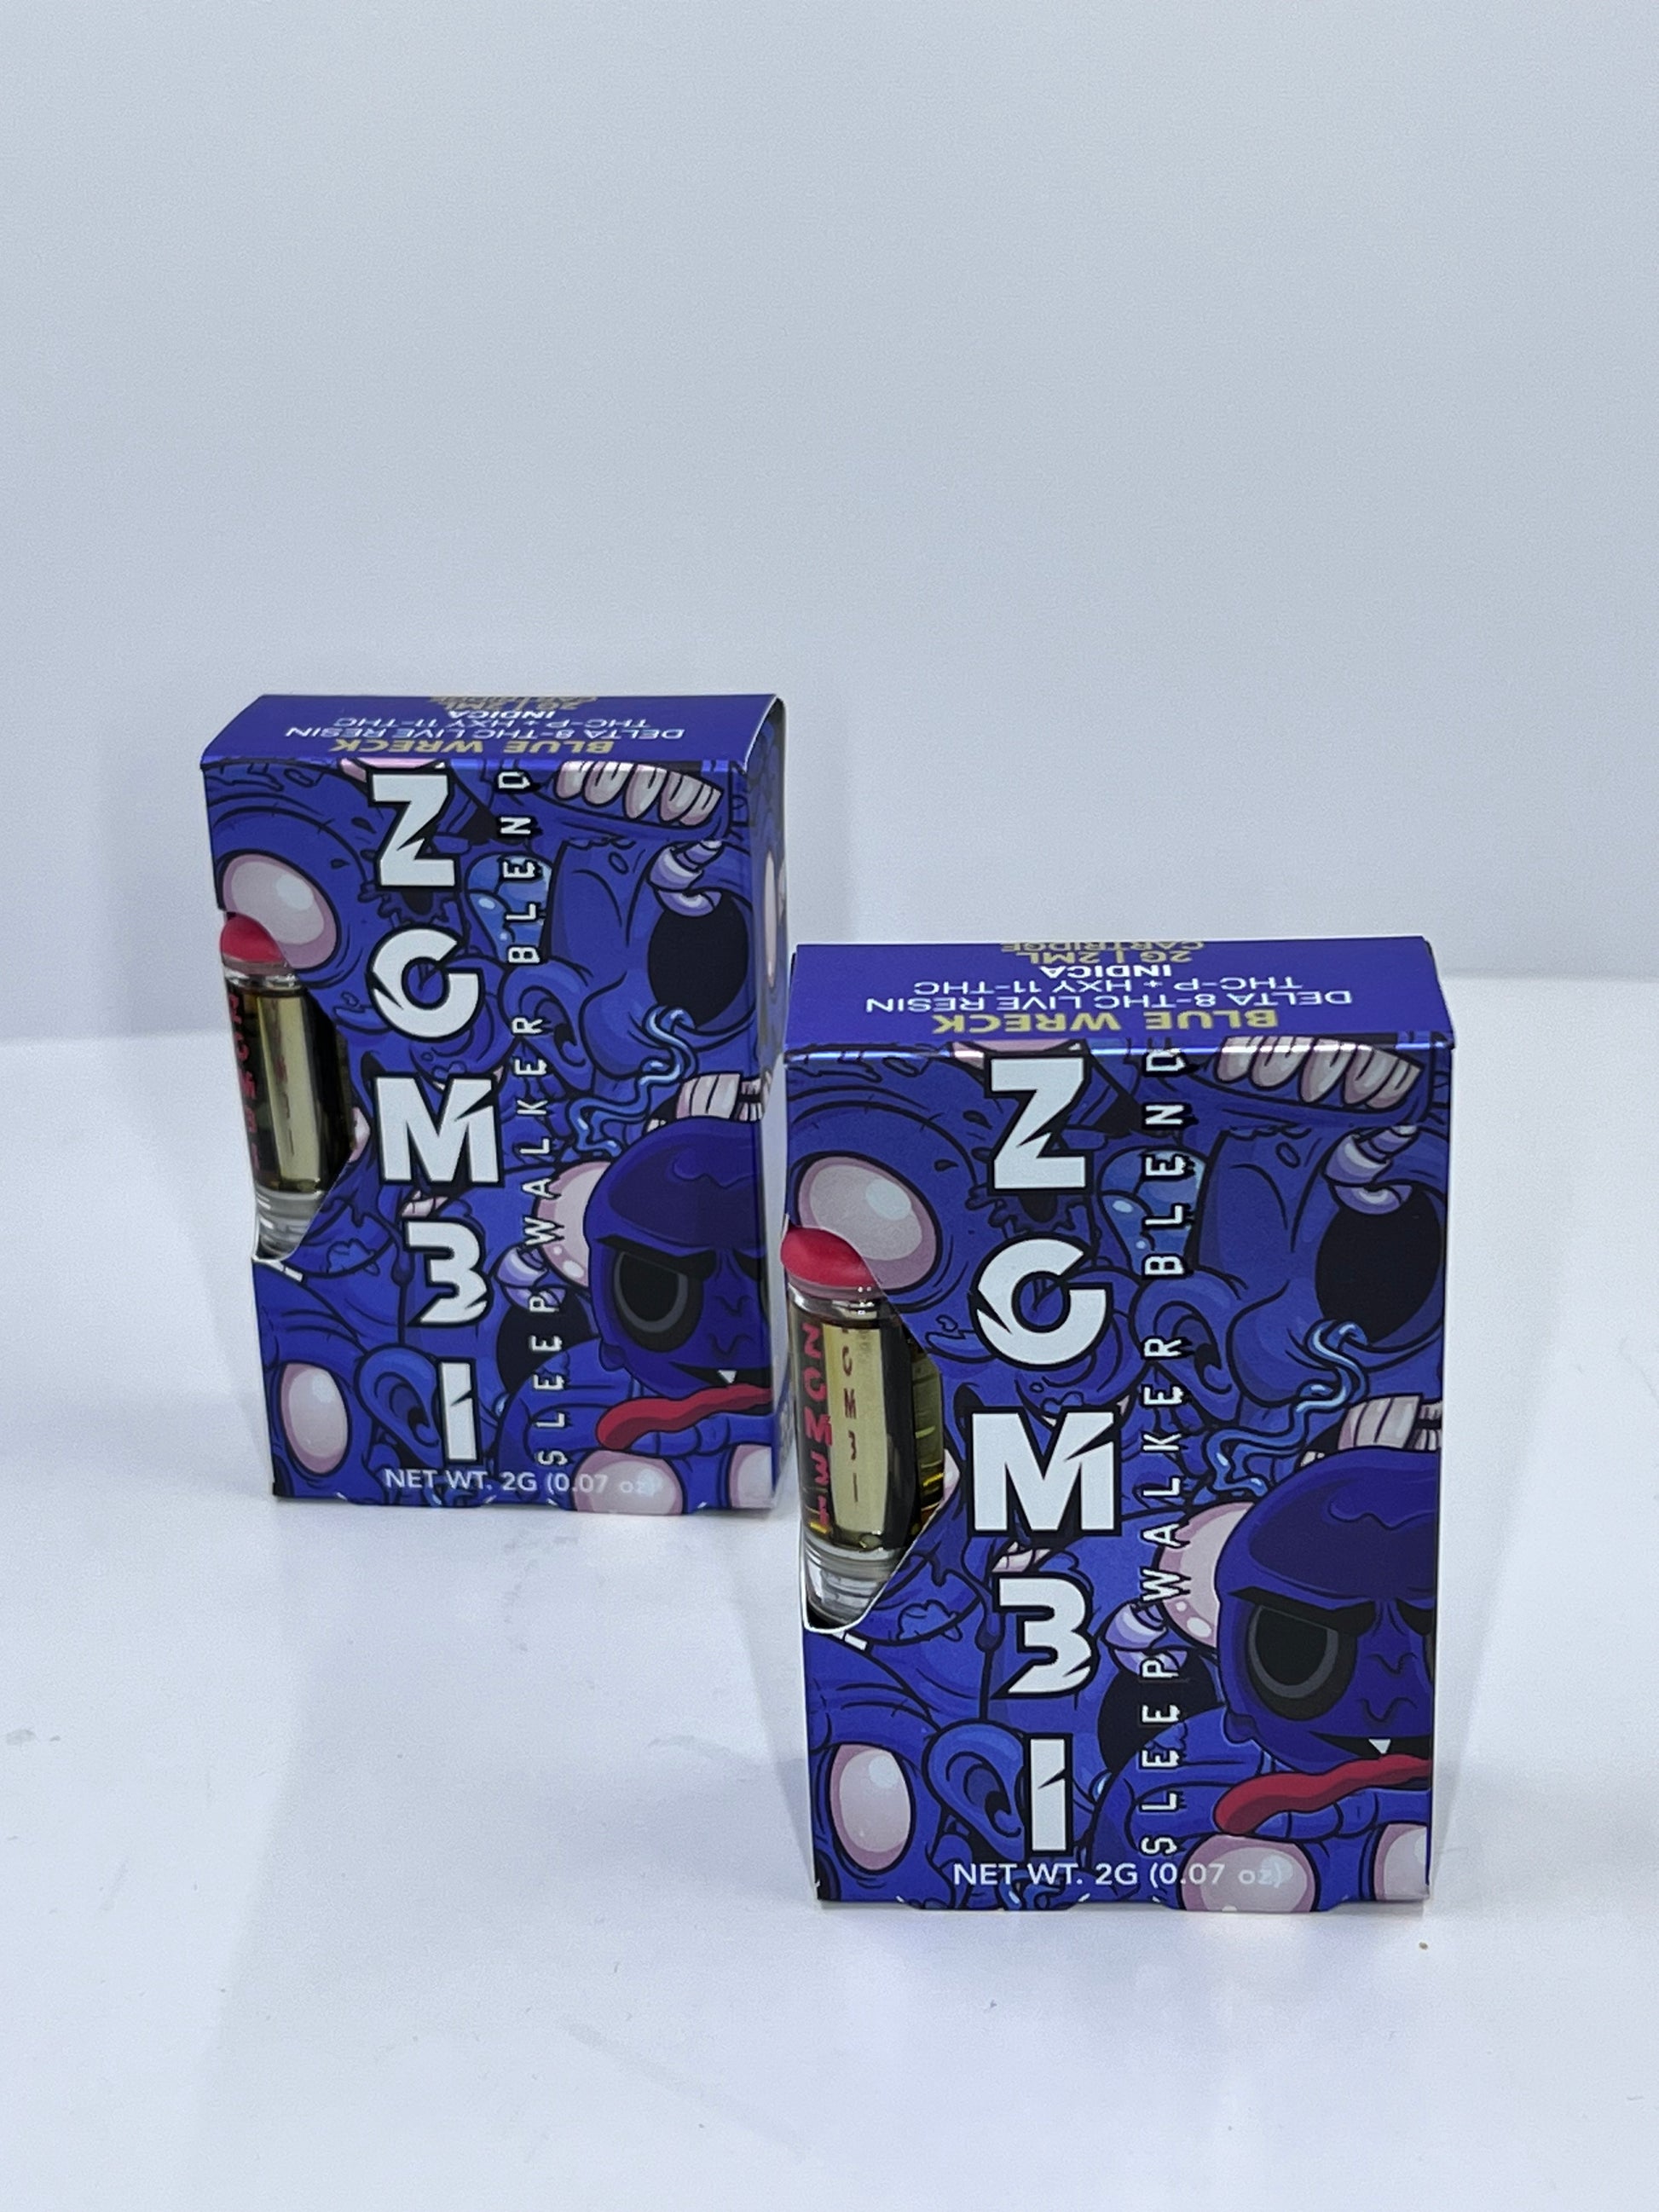 Zombi Blue Wreck 2-Gram Cartridge – Delta-8 THC + THC-P + HXY-11 THC yoga smokes smoke shop, dispensary, local dispensary, smokeshop near me, port st lucie smoke shop, smoke shop in port st lucie, smoke shop in port saint lucie, smoke shop in florida, Yoga Smokes Two Devices Buy RAW Rolling Papers USA, smoke shop near me, what time does the smoke shop close, smoke shop open near me, 24 hour smoke shop near me